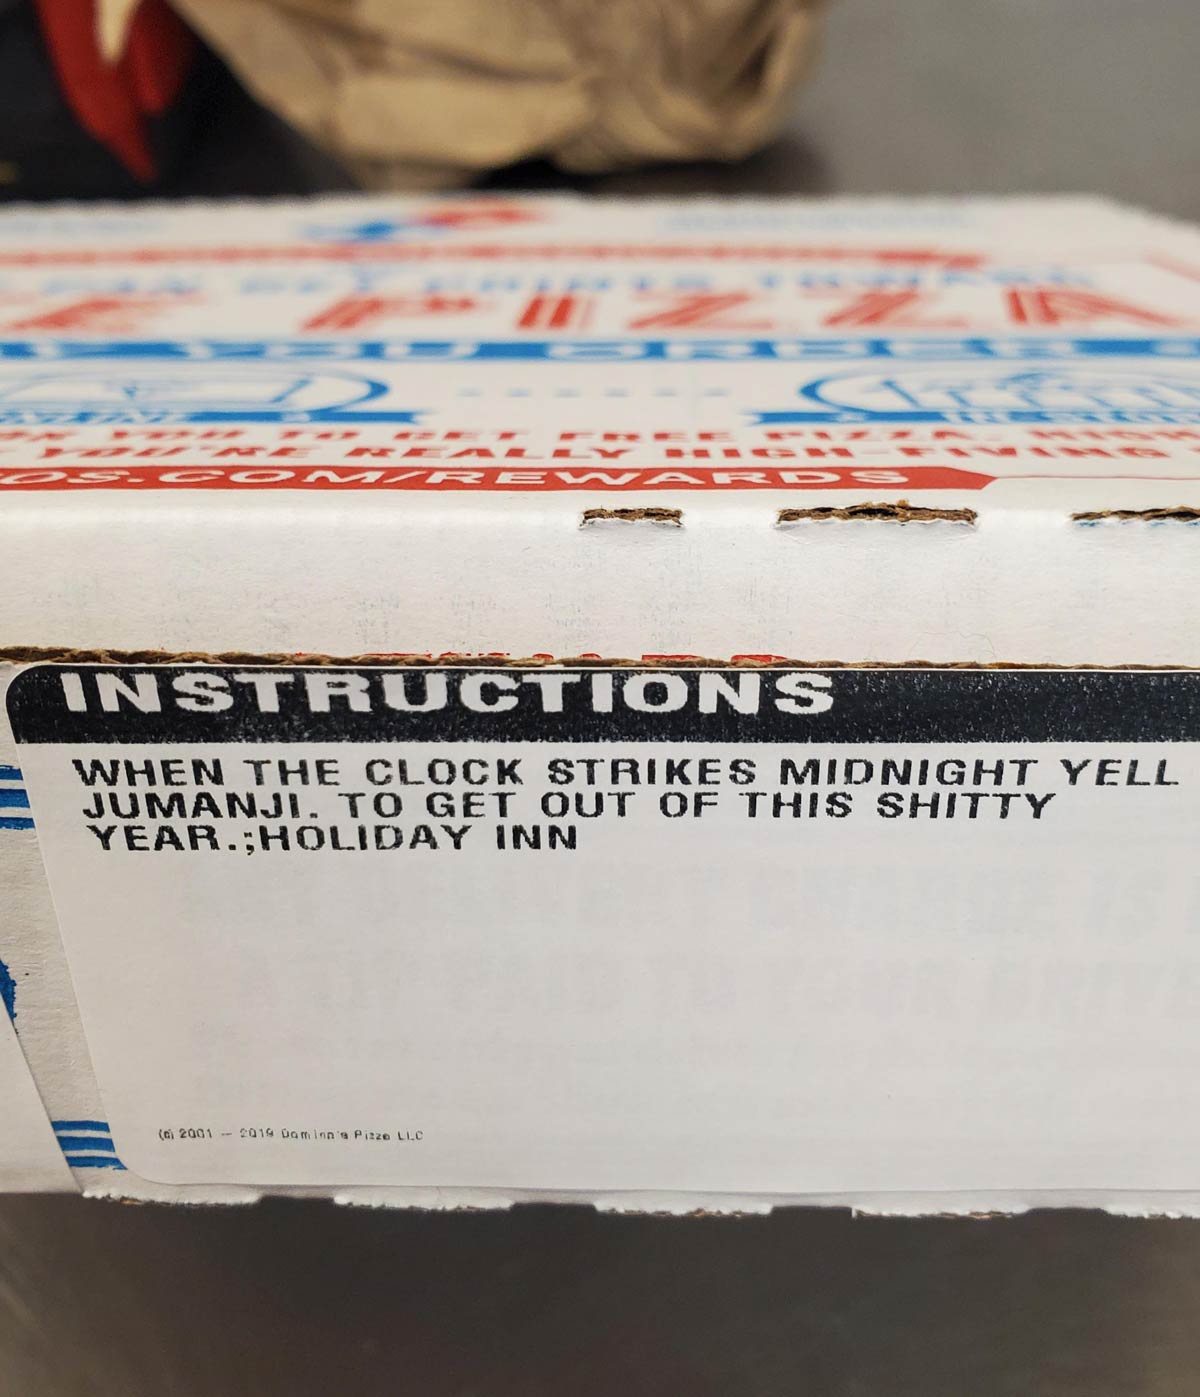 I work at a hotel and found this on an empty pizza box